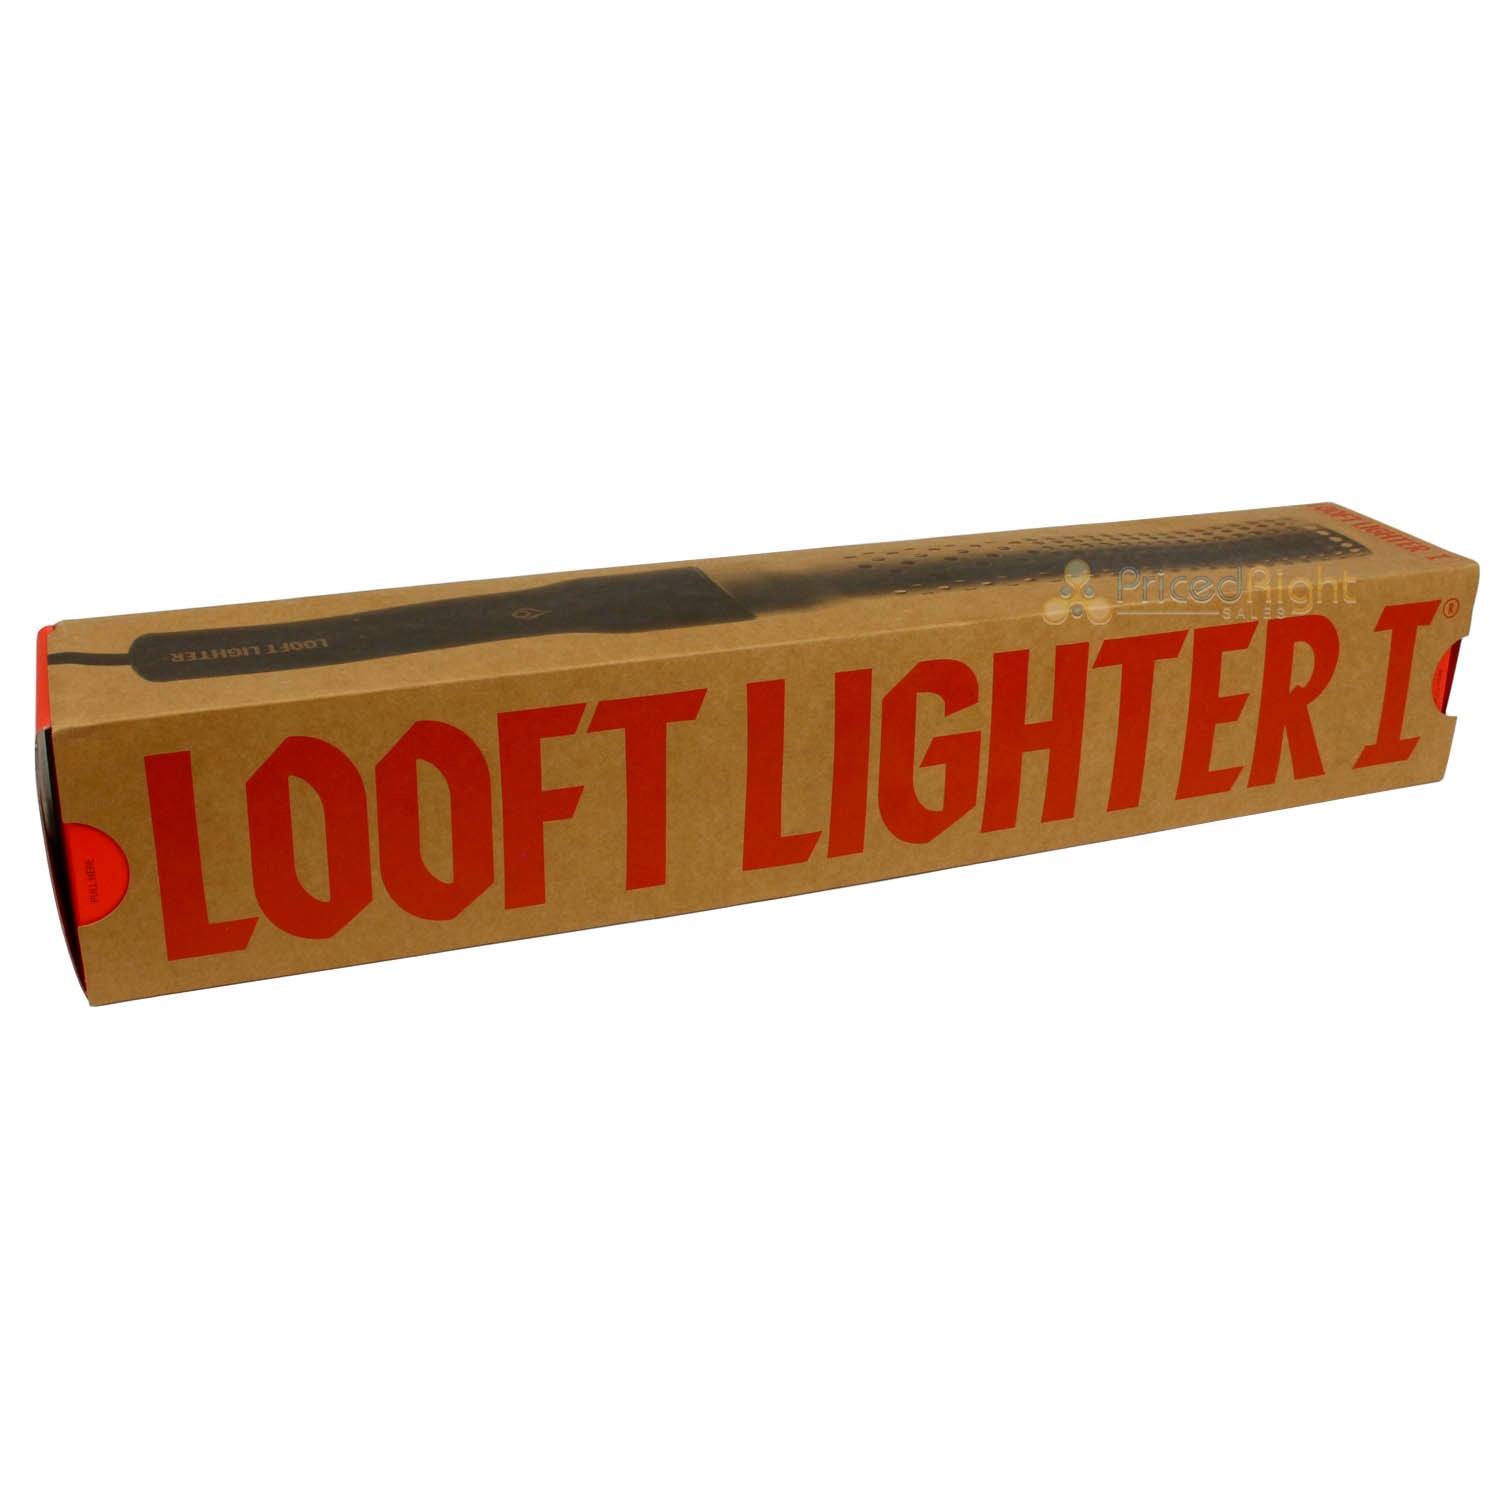 Looft Lighter 1 Electric Handheld Grill Firelighter Heated Air Lights All Fuels